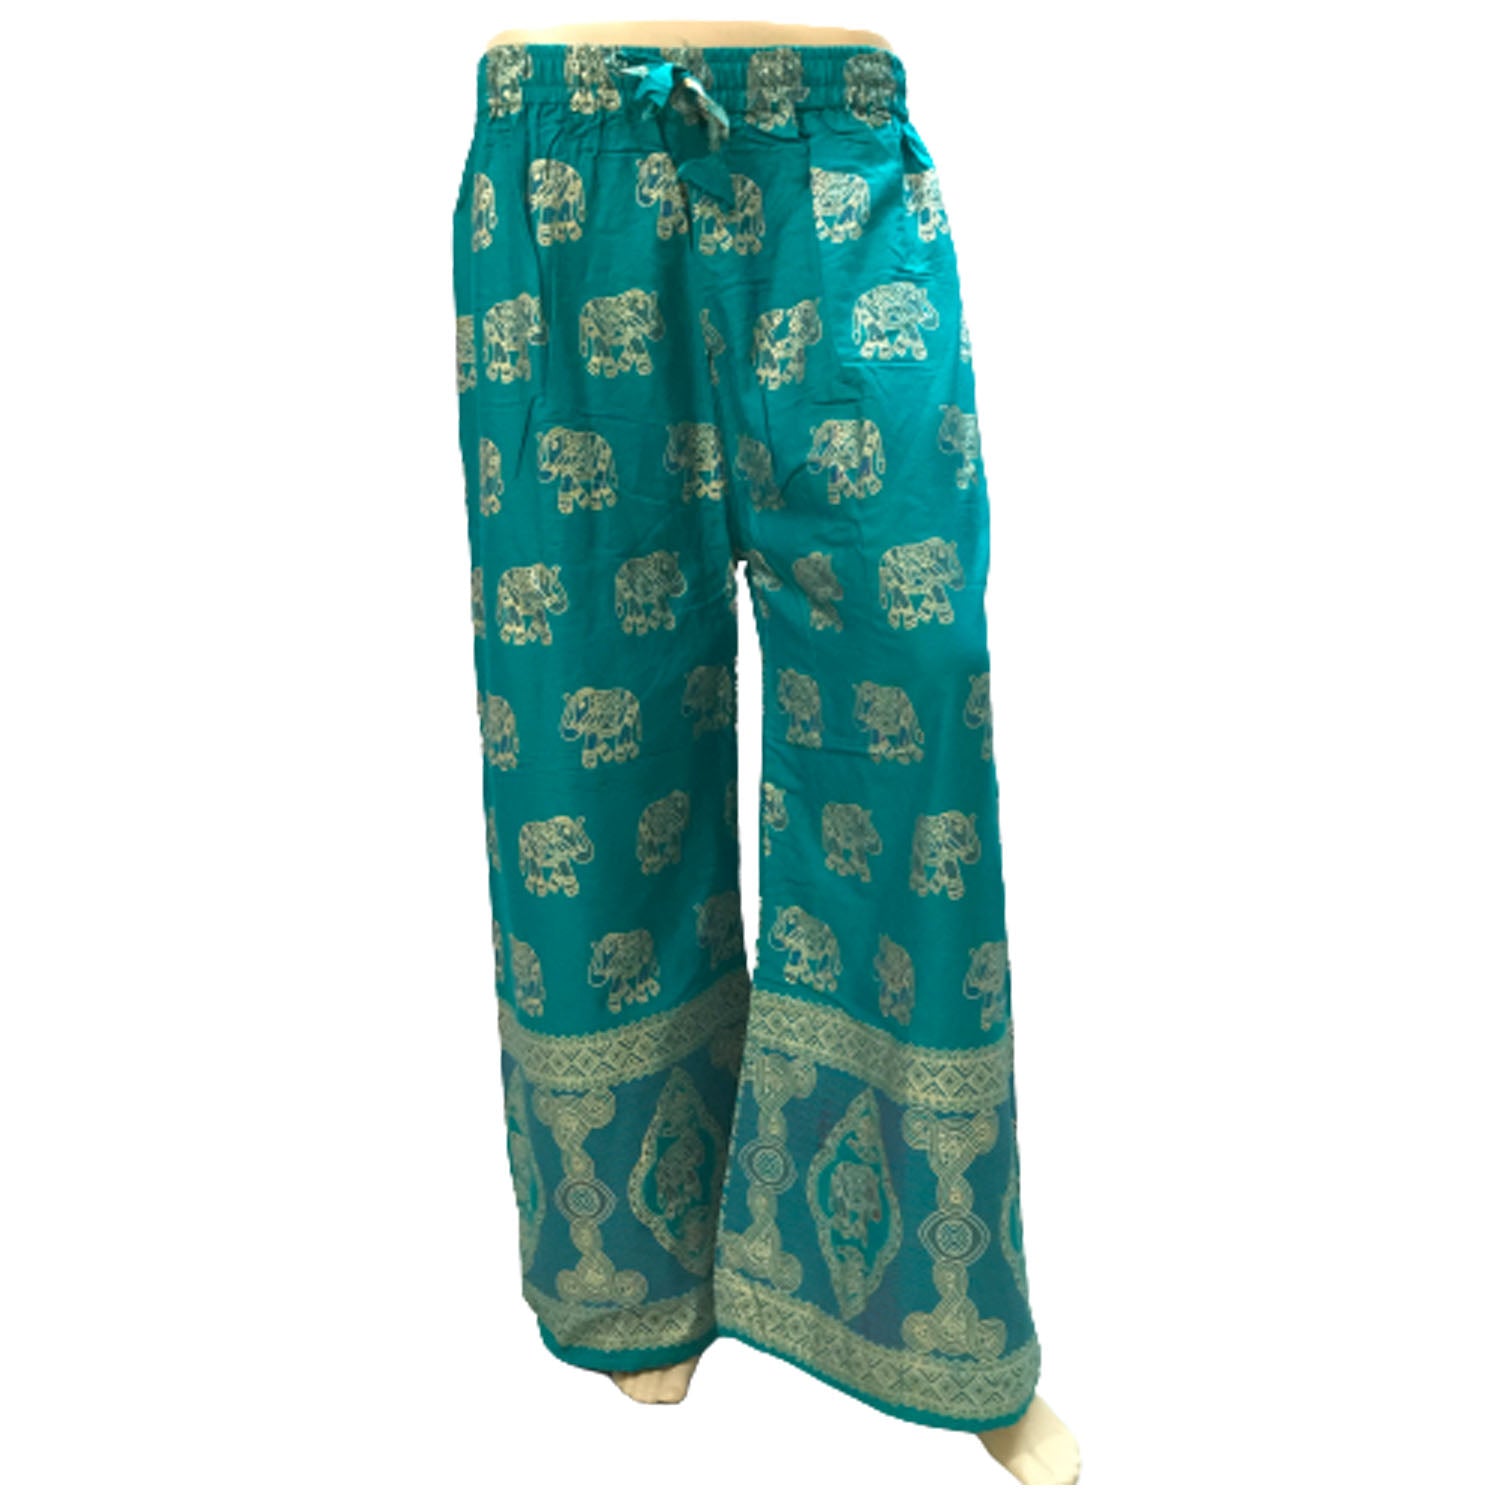 Ganesha Handicrafts Indian Style Elephant Print Solid Colour Loose Trousers, Trousers, loose Trousers, Colour Trousers, Print Trousers, Elephant Print Trousers, Indian Style Trousers, Indian Style Print Trousers